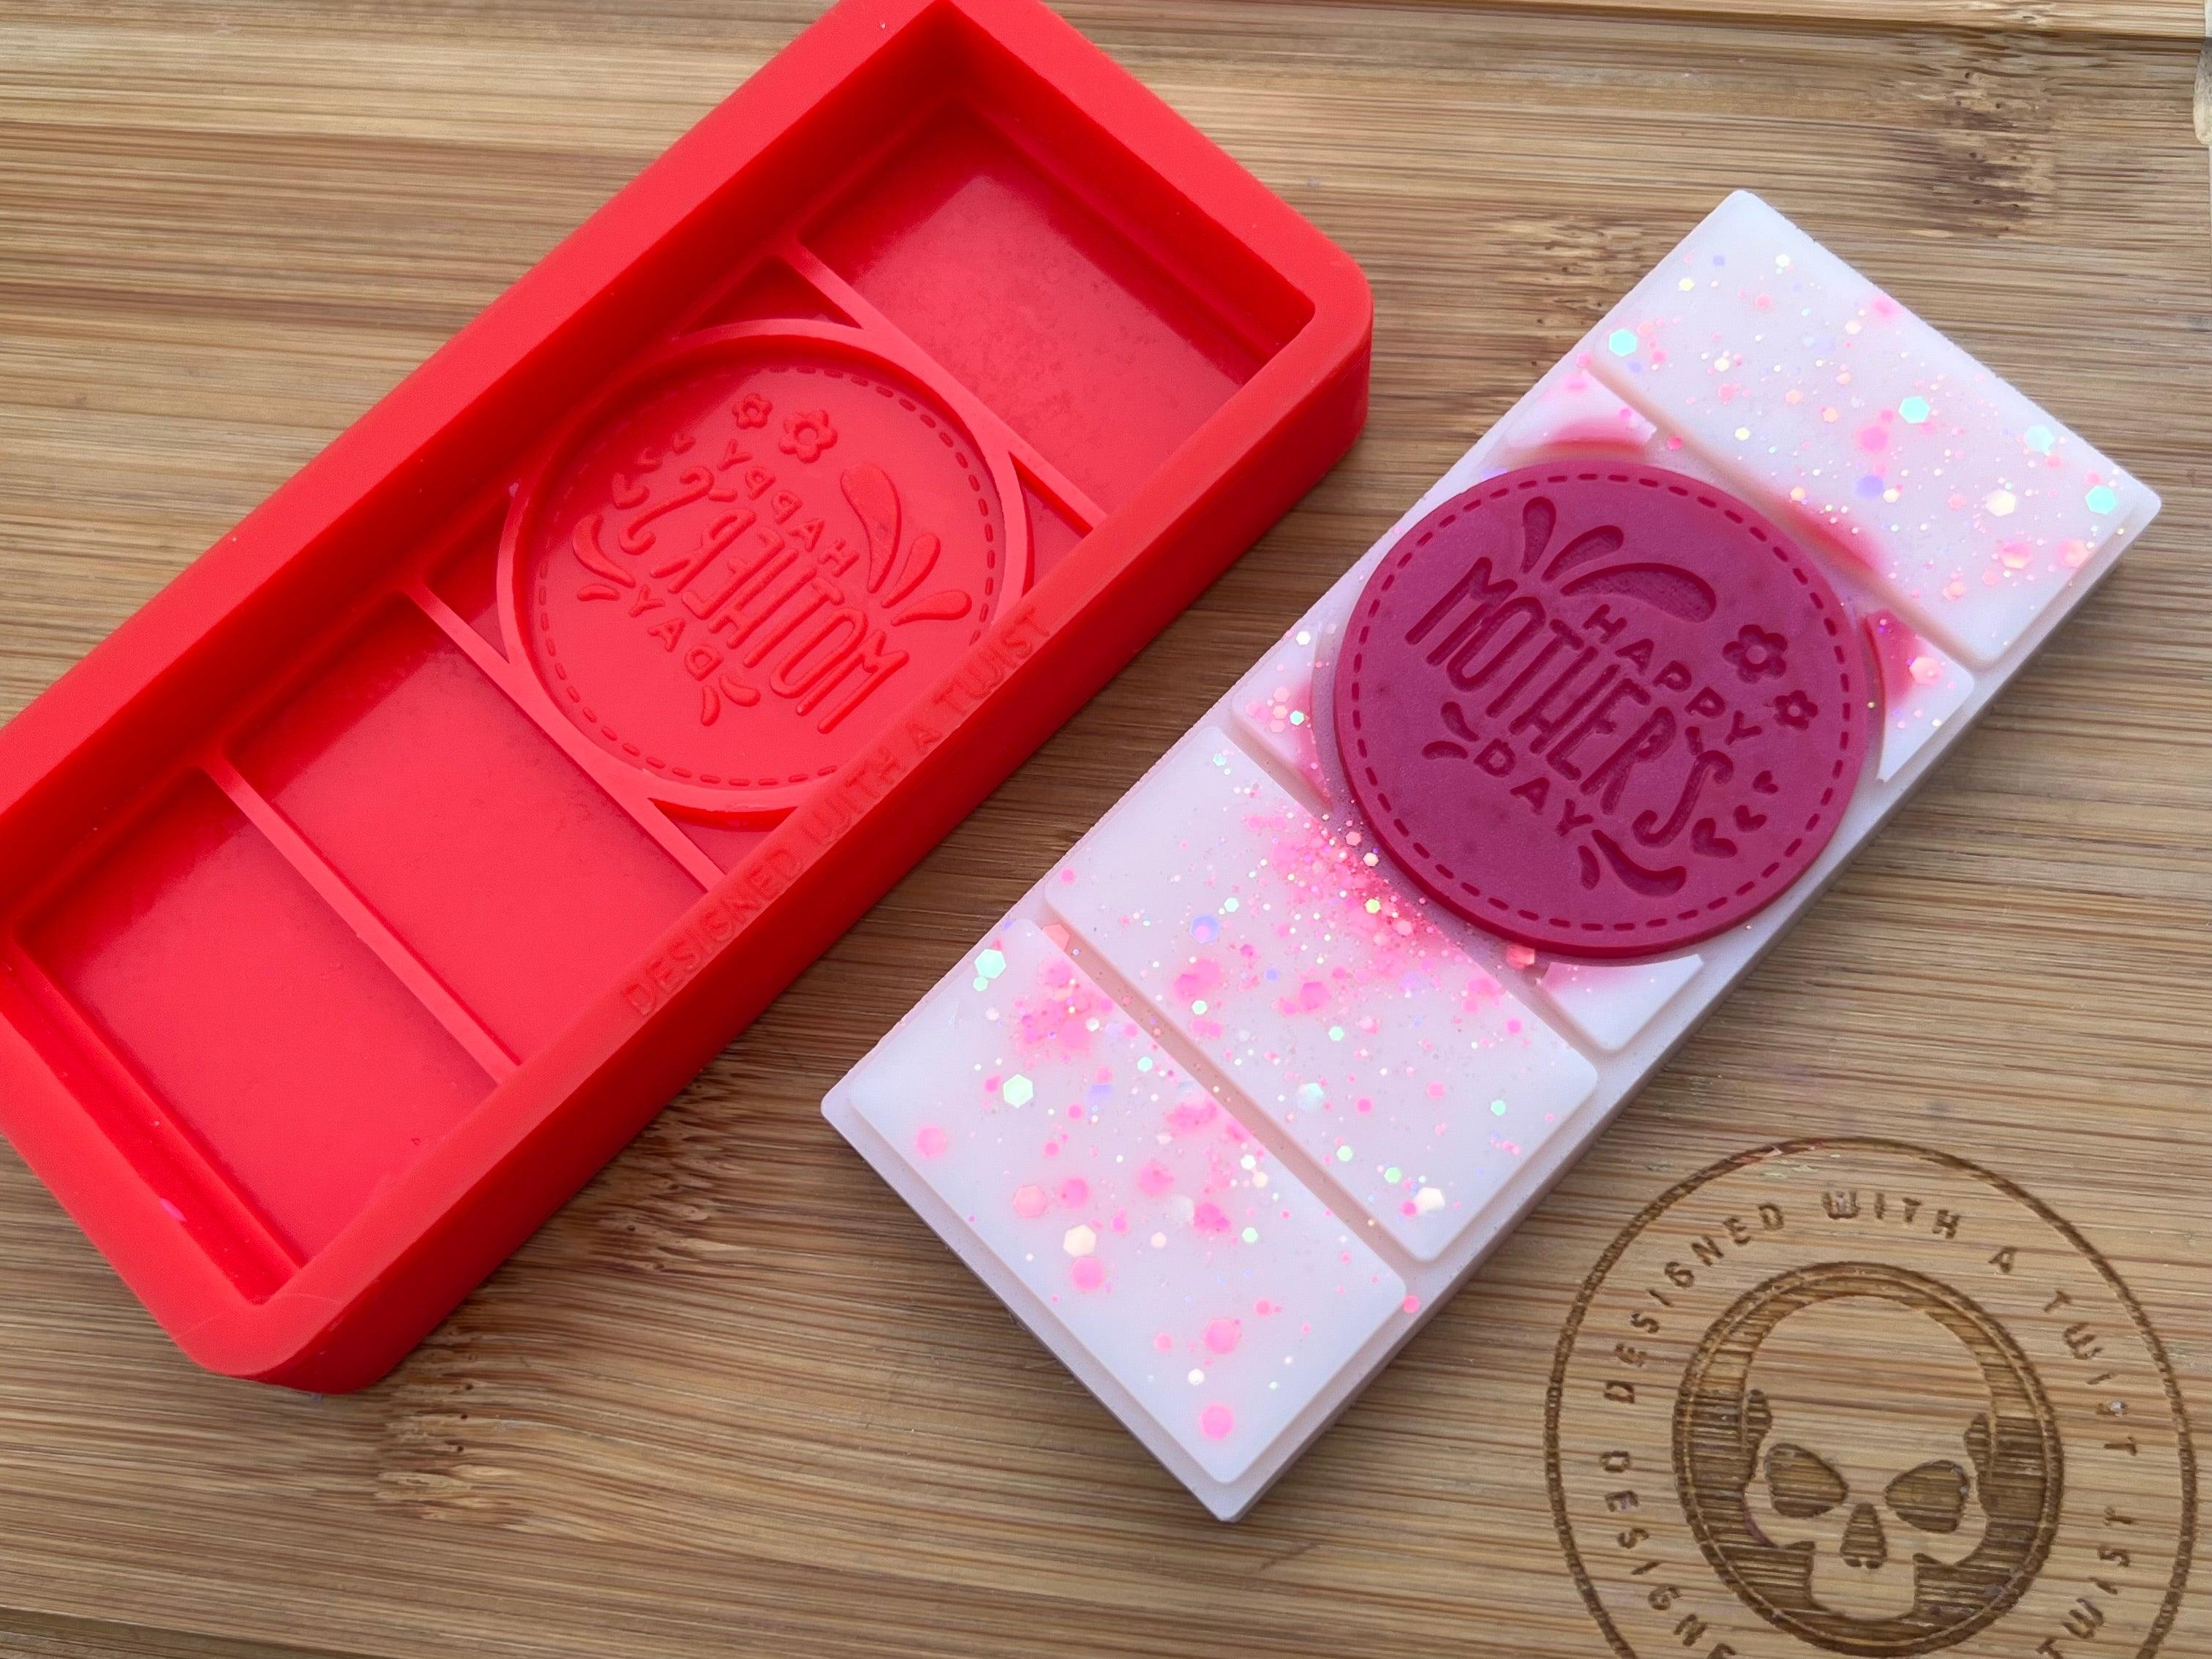 Happy Mothers Day Snapbar Silicone Mold - Designed with a Twist - Top quality silicone molds made in the UK.